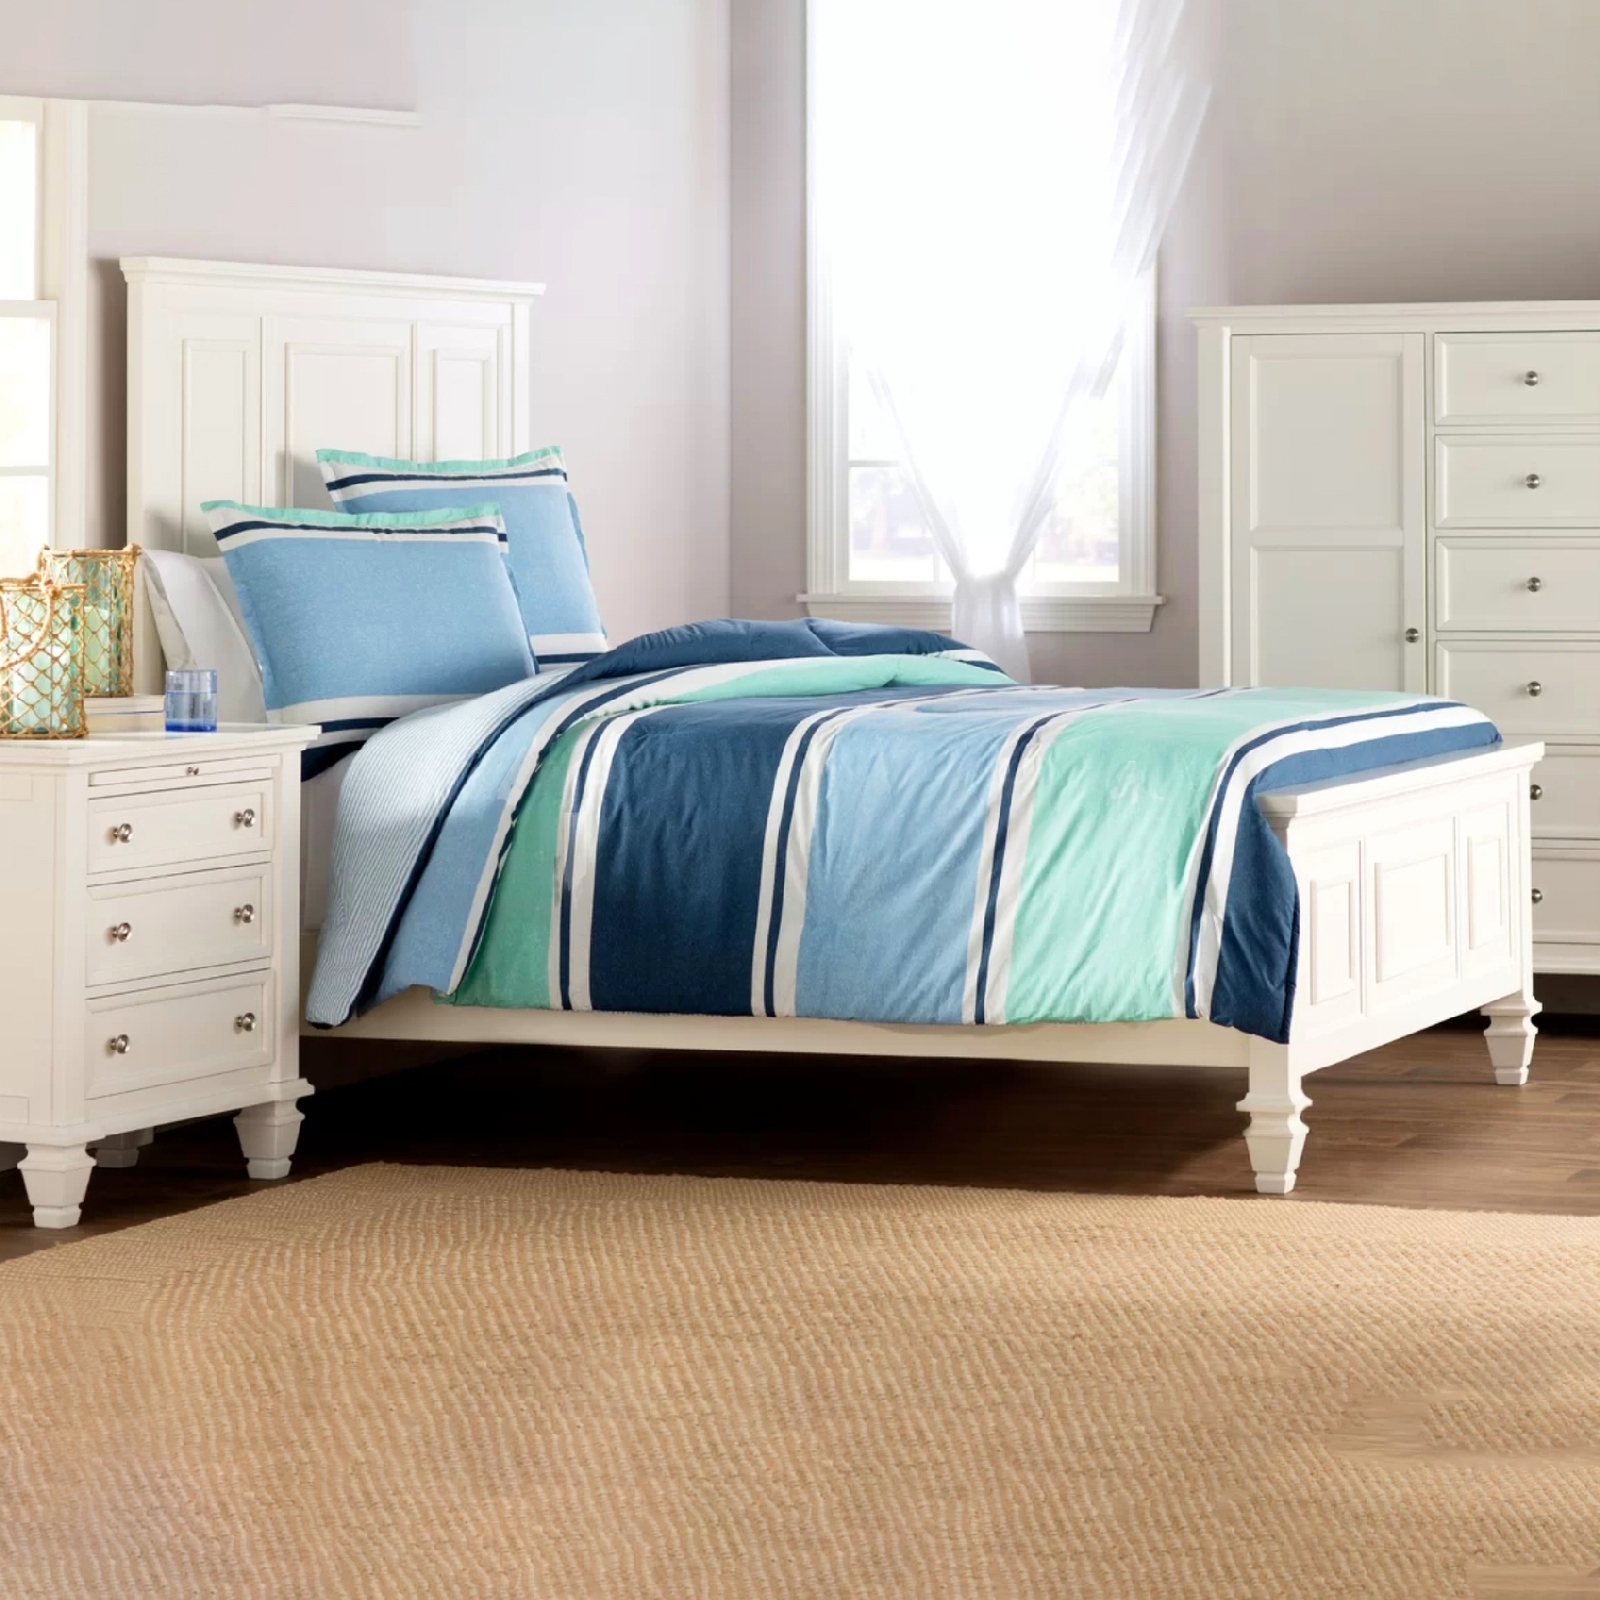 Fsh Magness Standard Double Bed Size